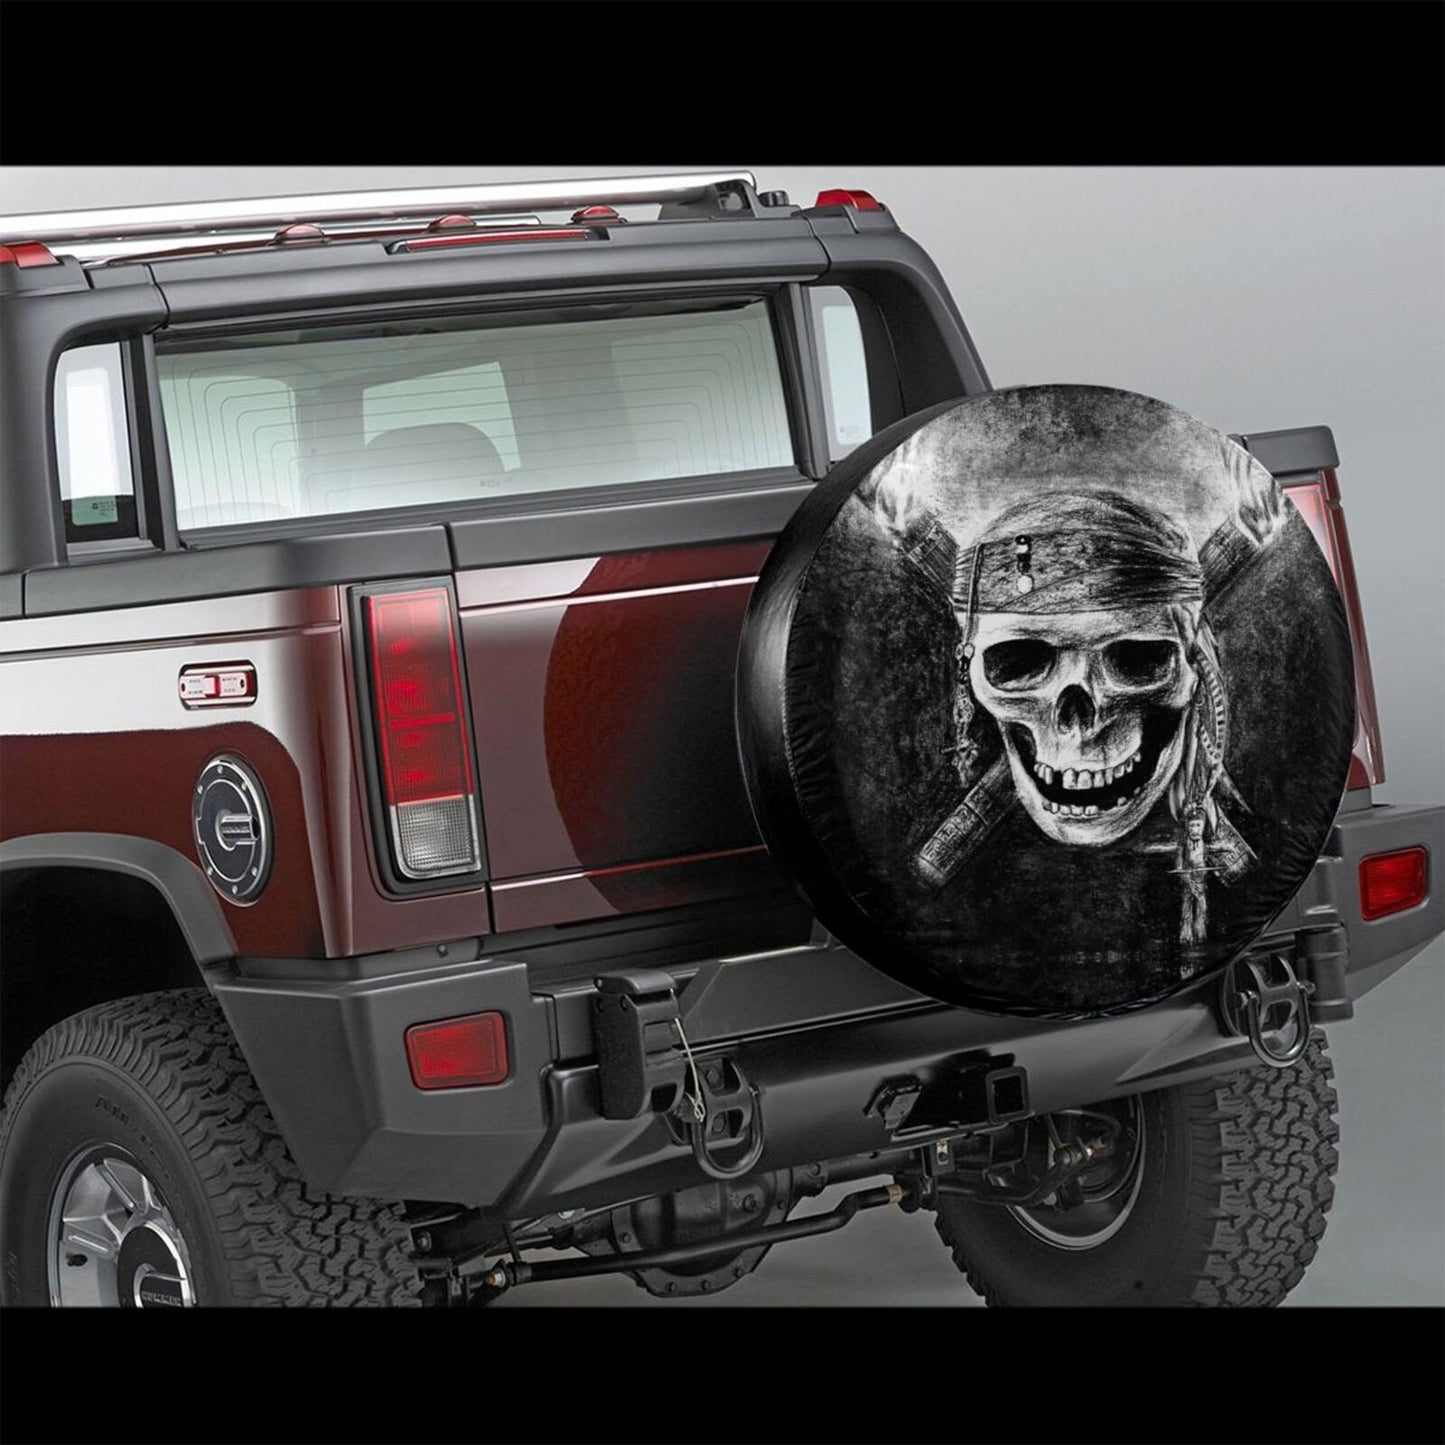 Skull American Flag Spare Tire Cover Spare Tire Cover For Camping, Bronco, CRV, Jeep Wrangle car Accessories tire protector